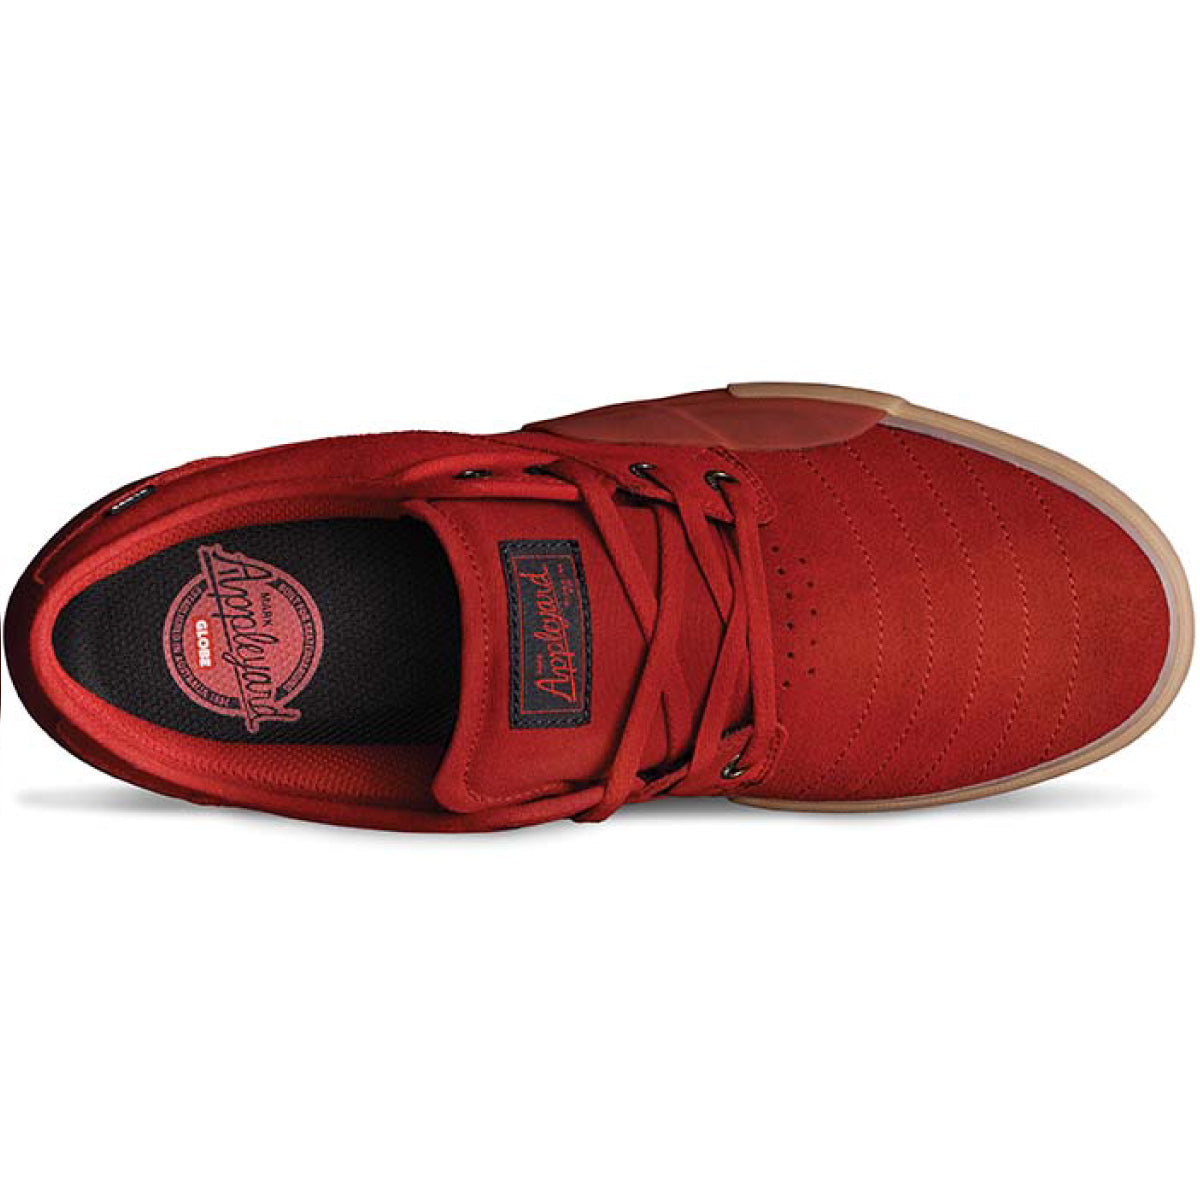 mahalo plus red gum skate shoes